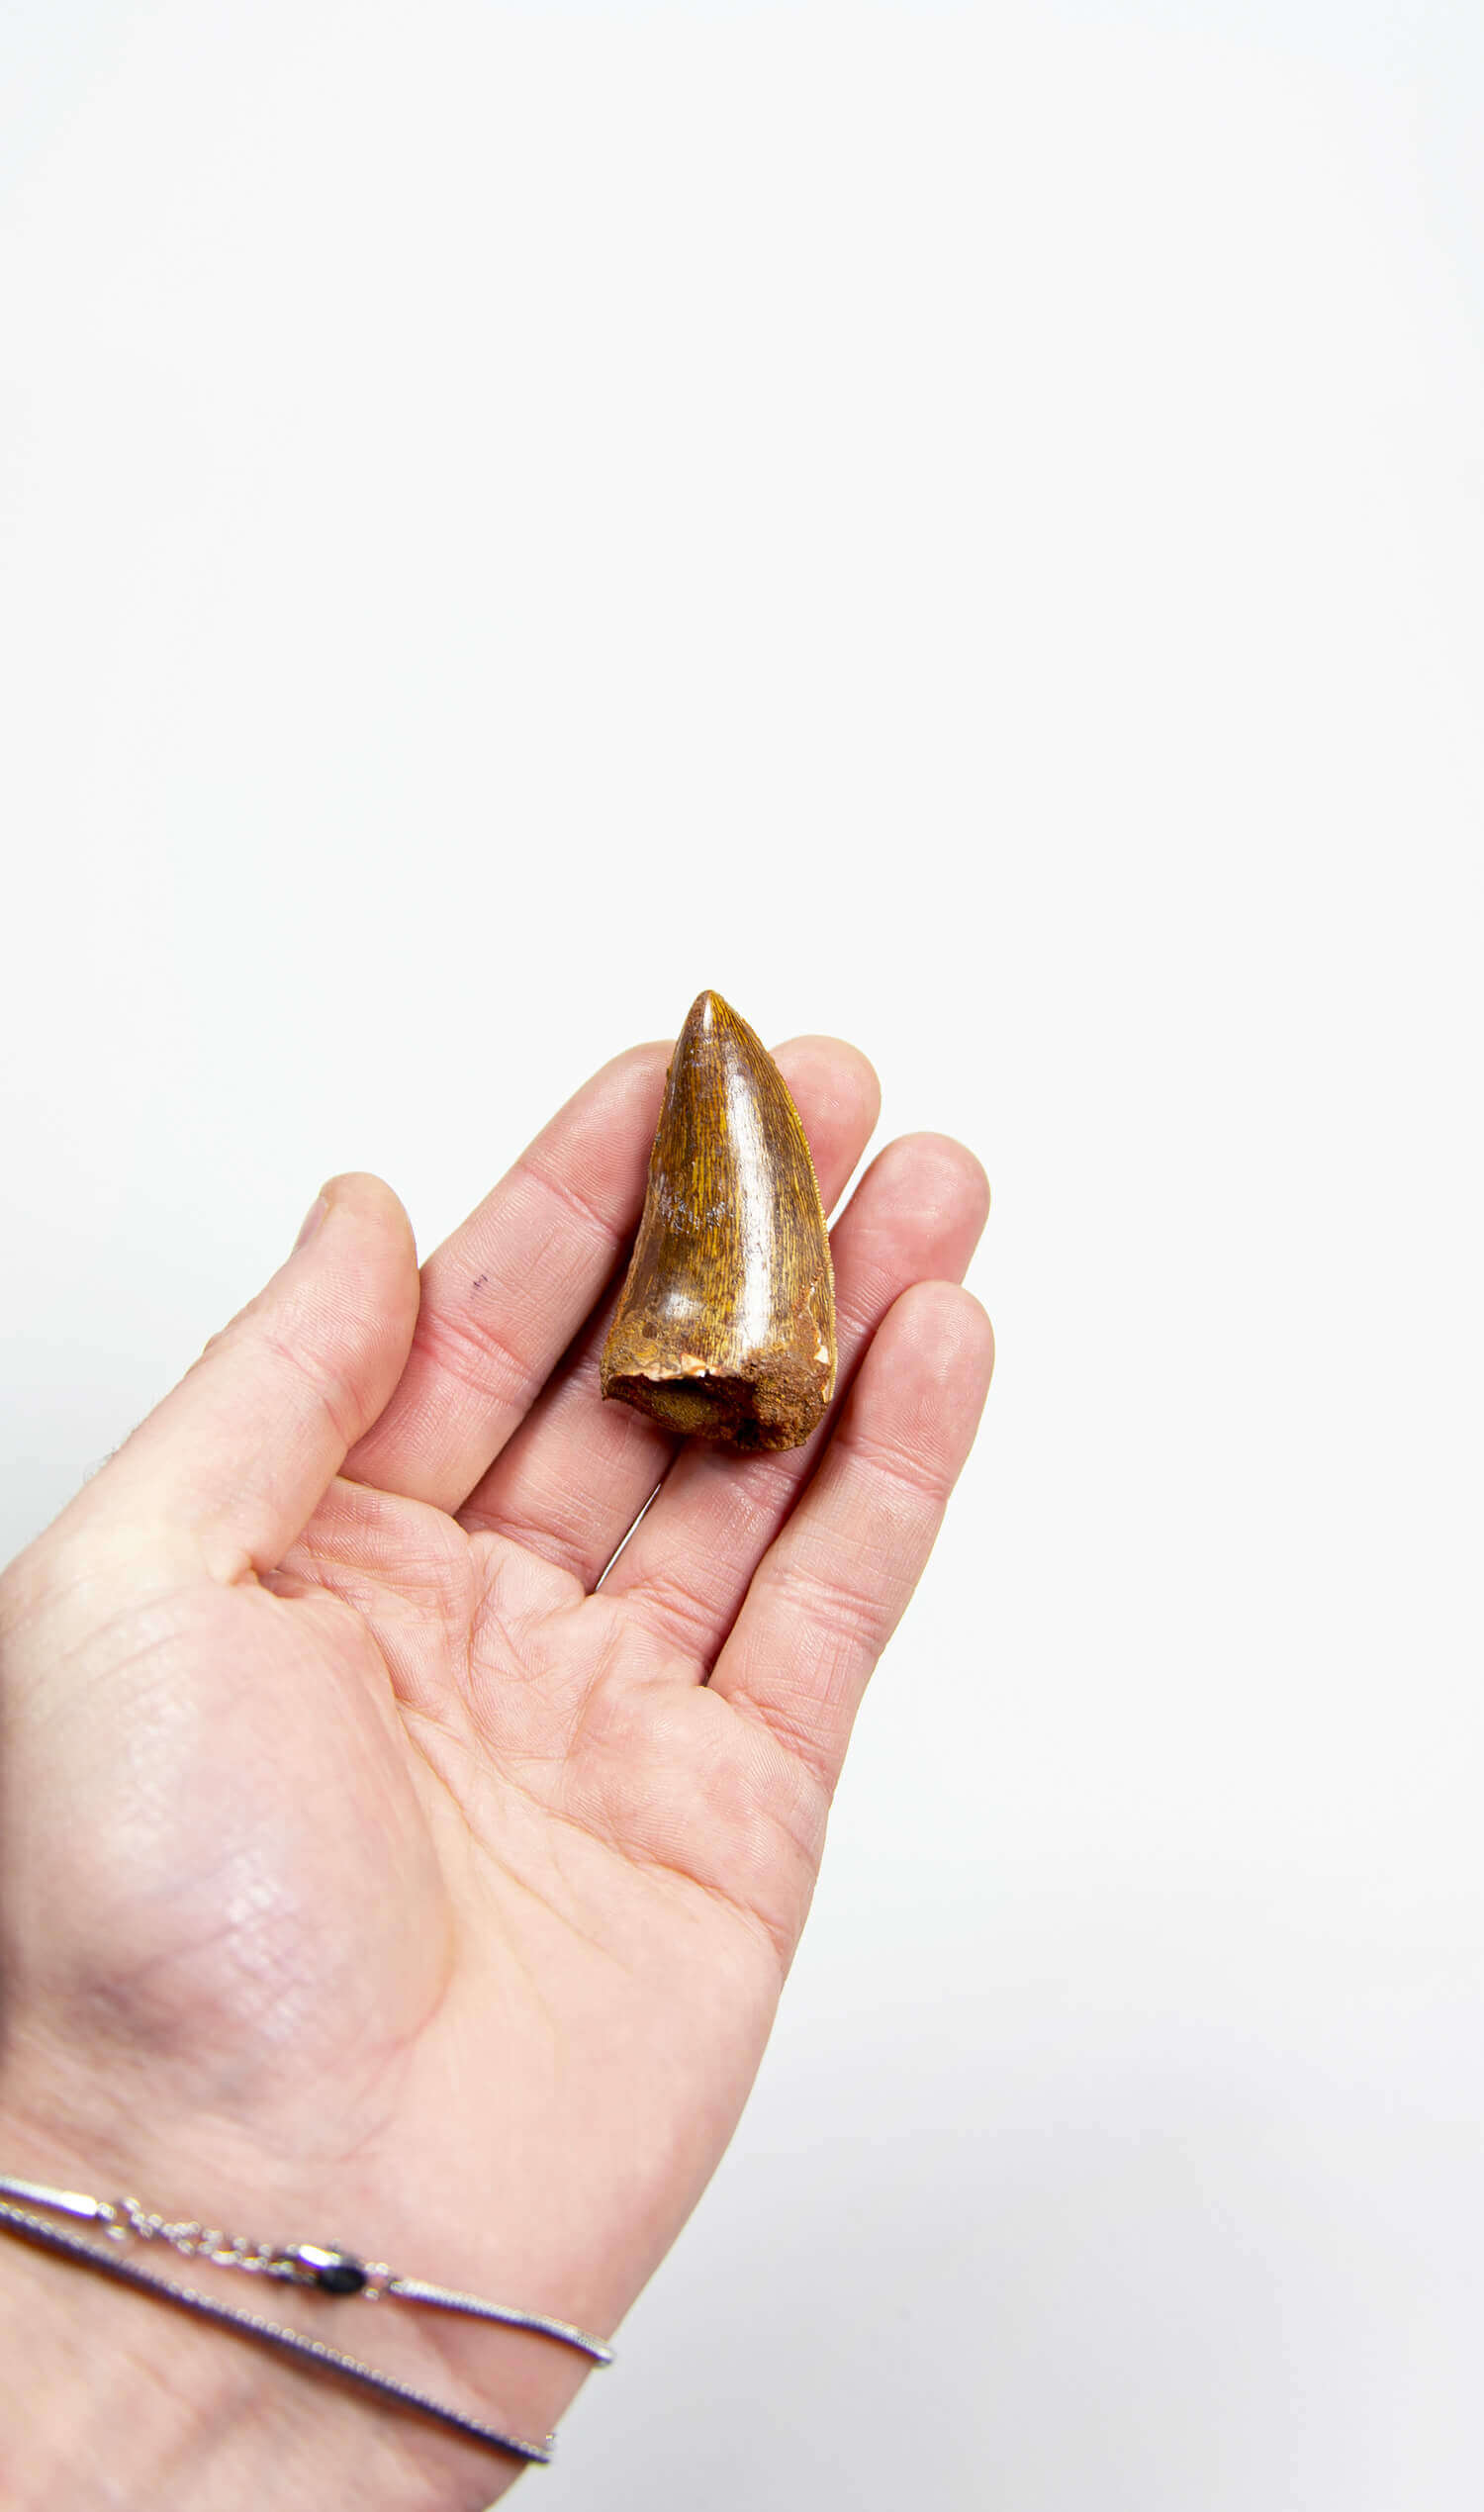 The Fossil Shark Tooth Cap Set Pendant | Starborn Creations